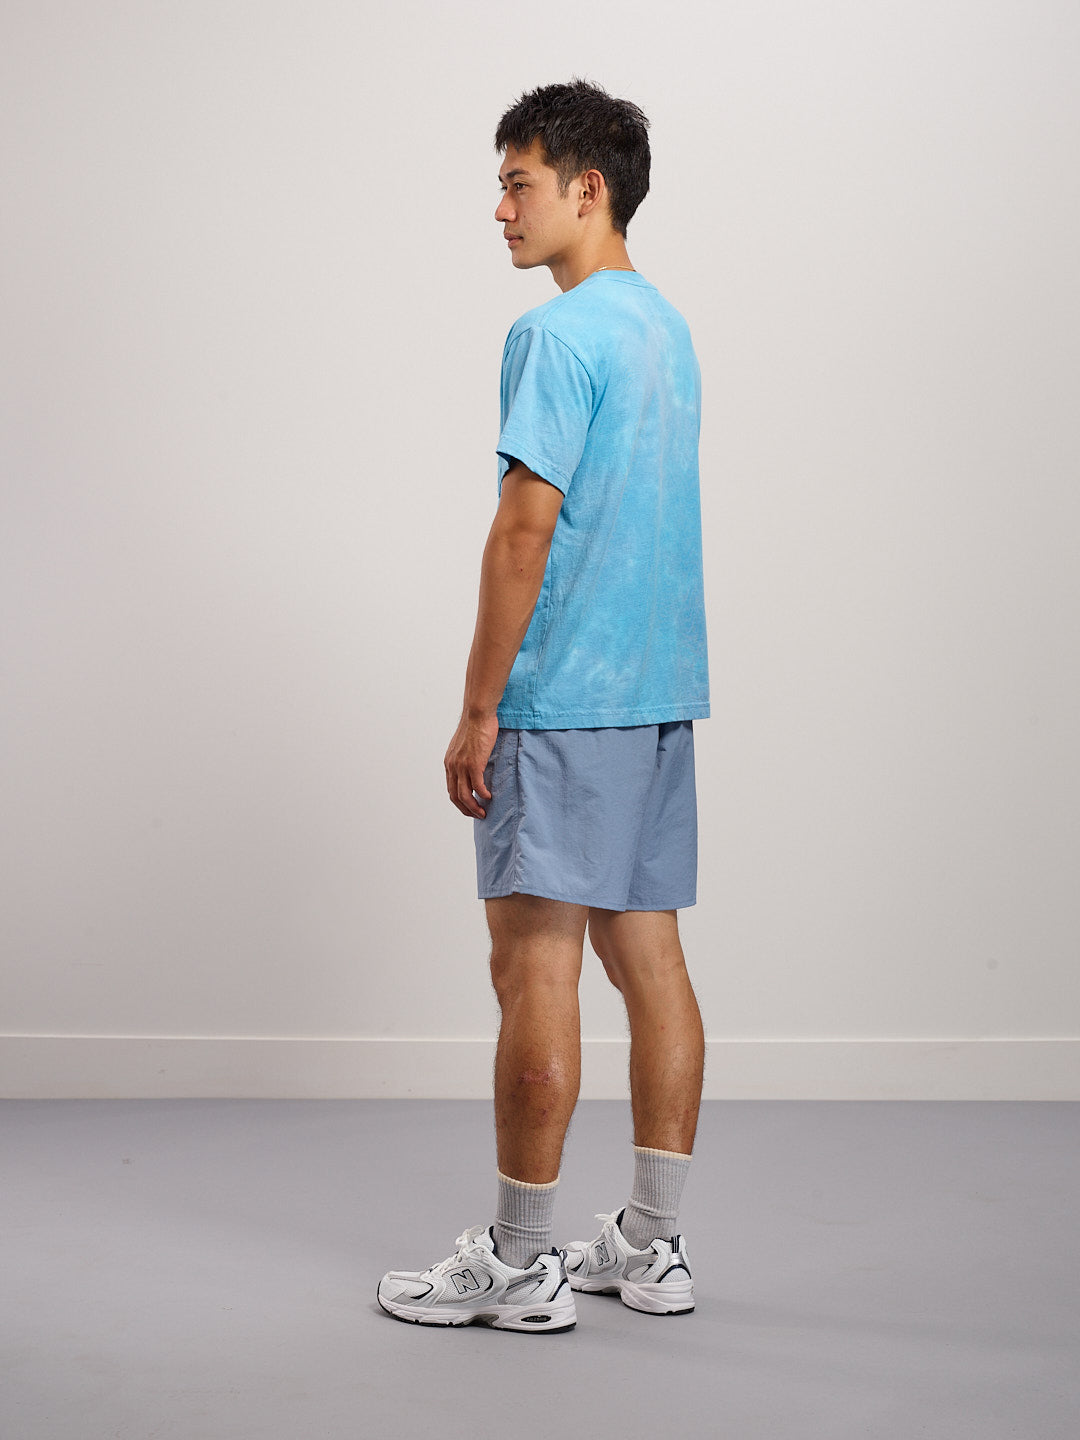 Short Sleeve Pocket Tee - Washed Cloudy Blue